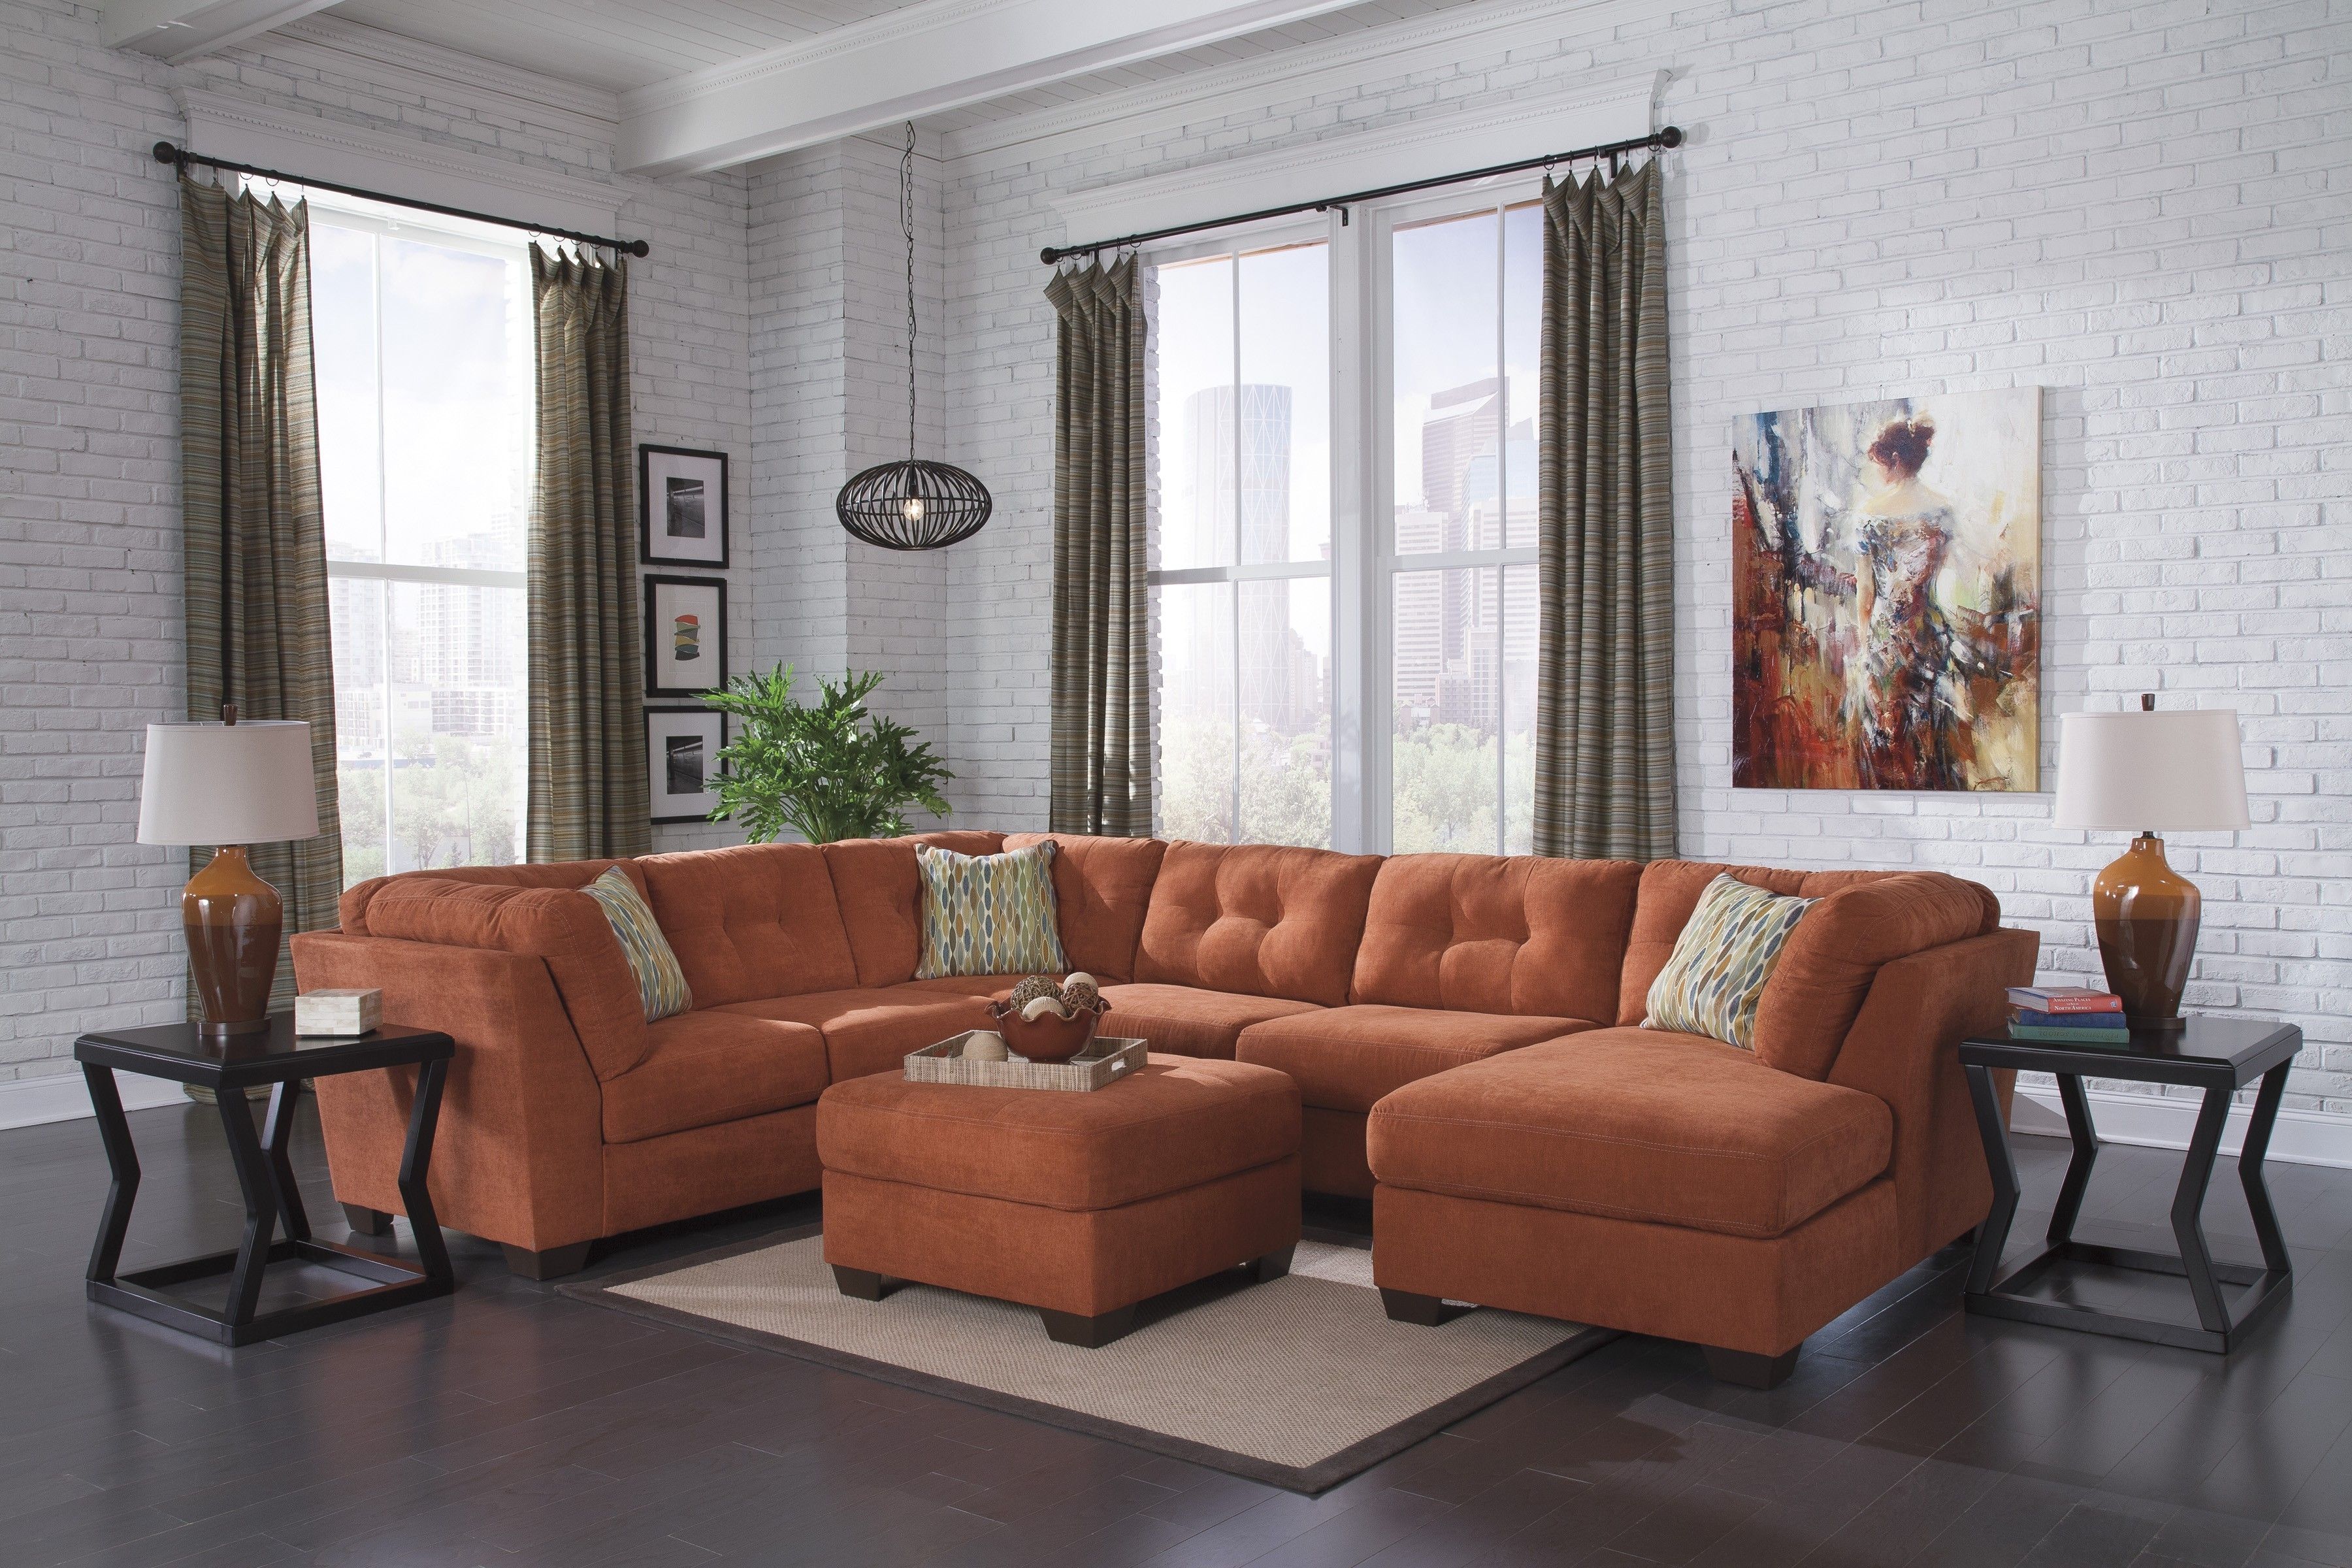 Delta Rust 19701 3 Pc Sectional Throughout Sierra Foam Ii 3 Piece Sectionals (View 23 of 30)